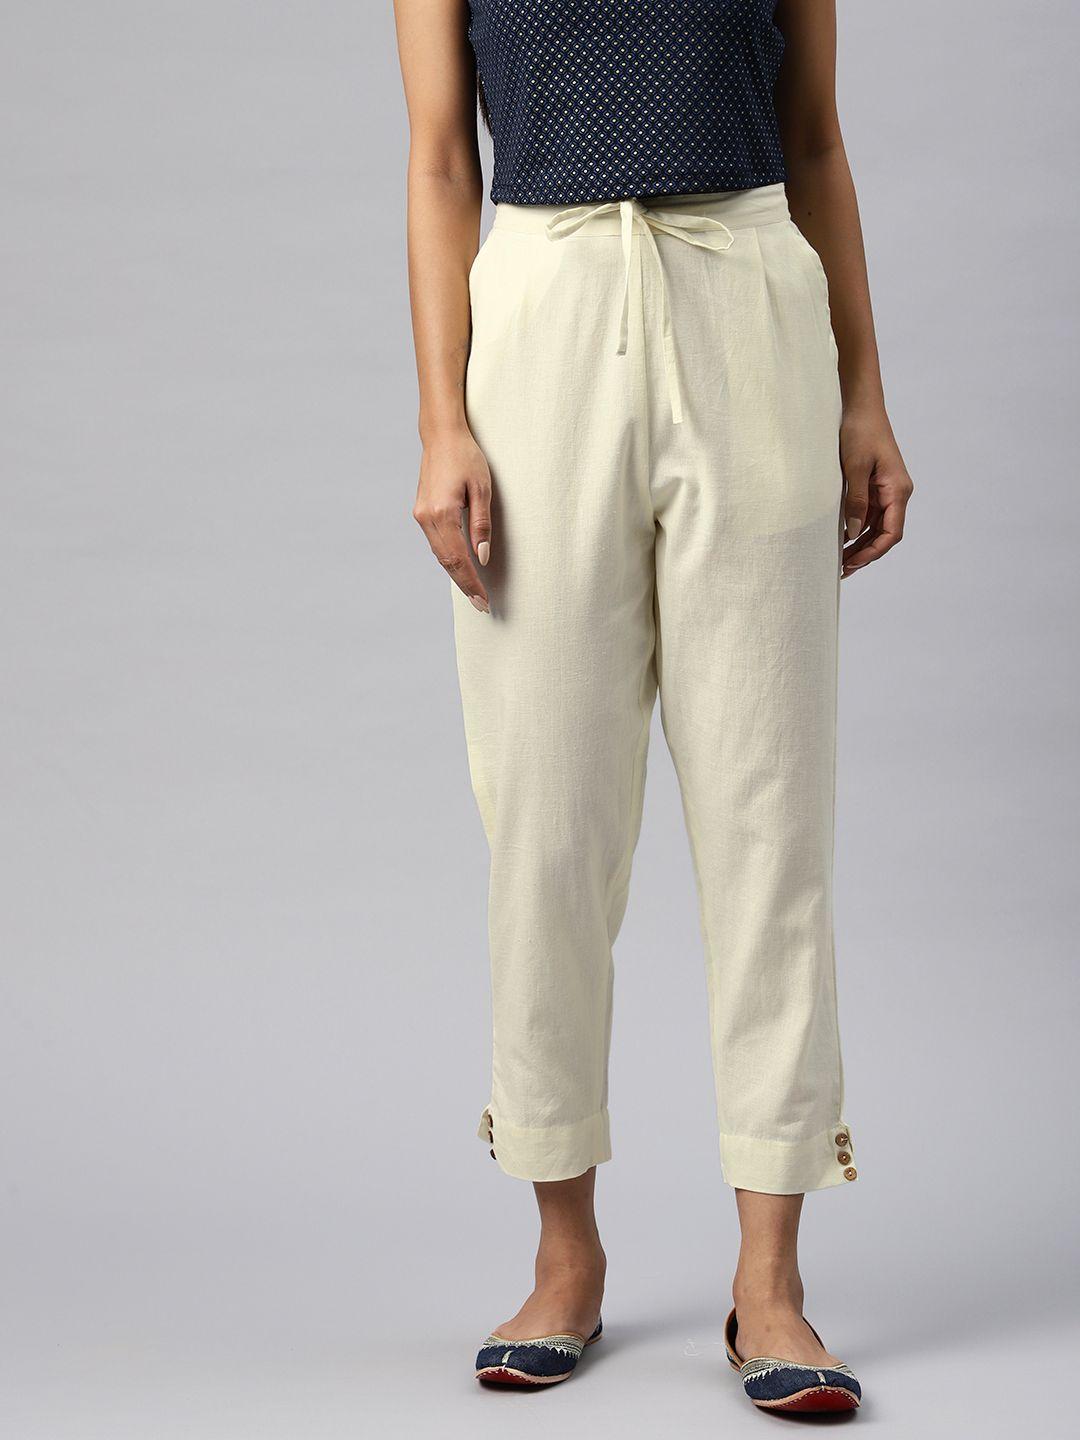 readiprint fashions tapered fit high-rise pleated ethnic trousers